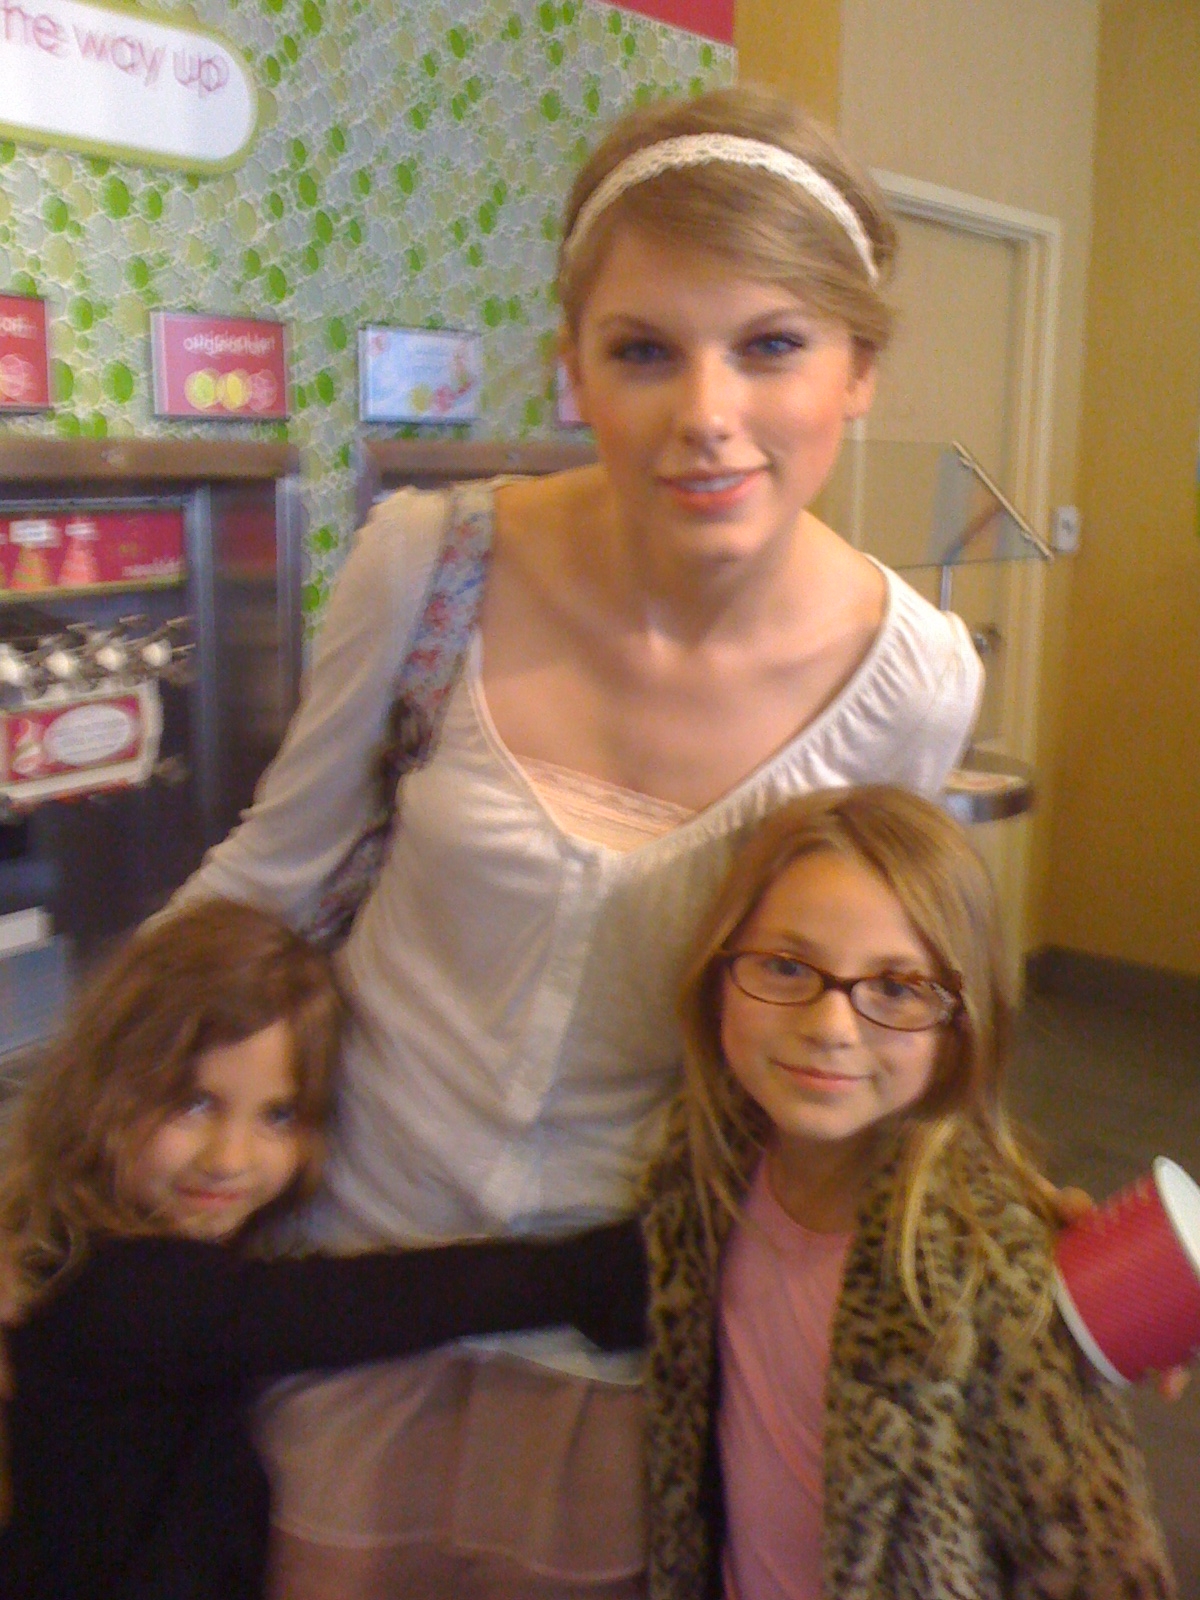 Georgia and her sister Toccoa with Taylor Swift